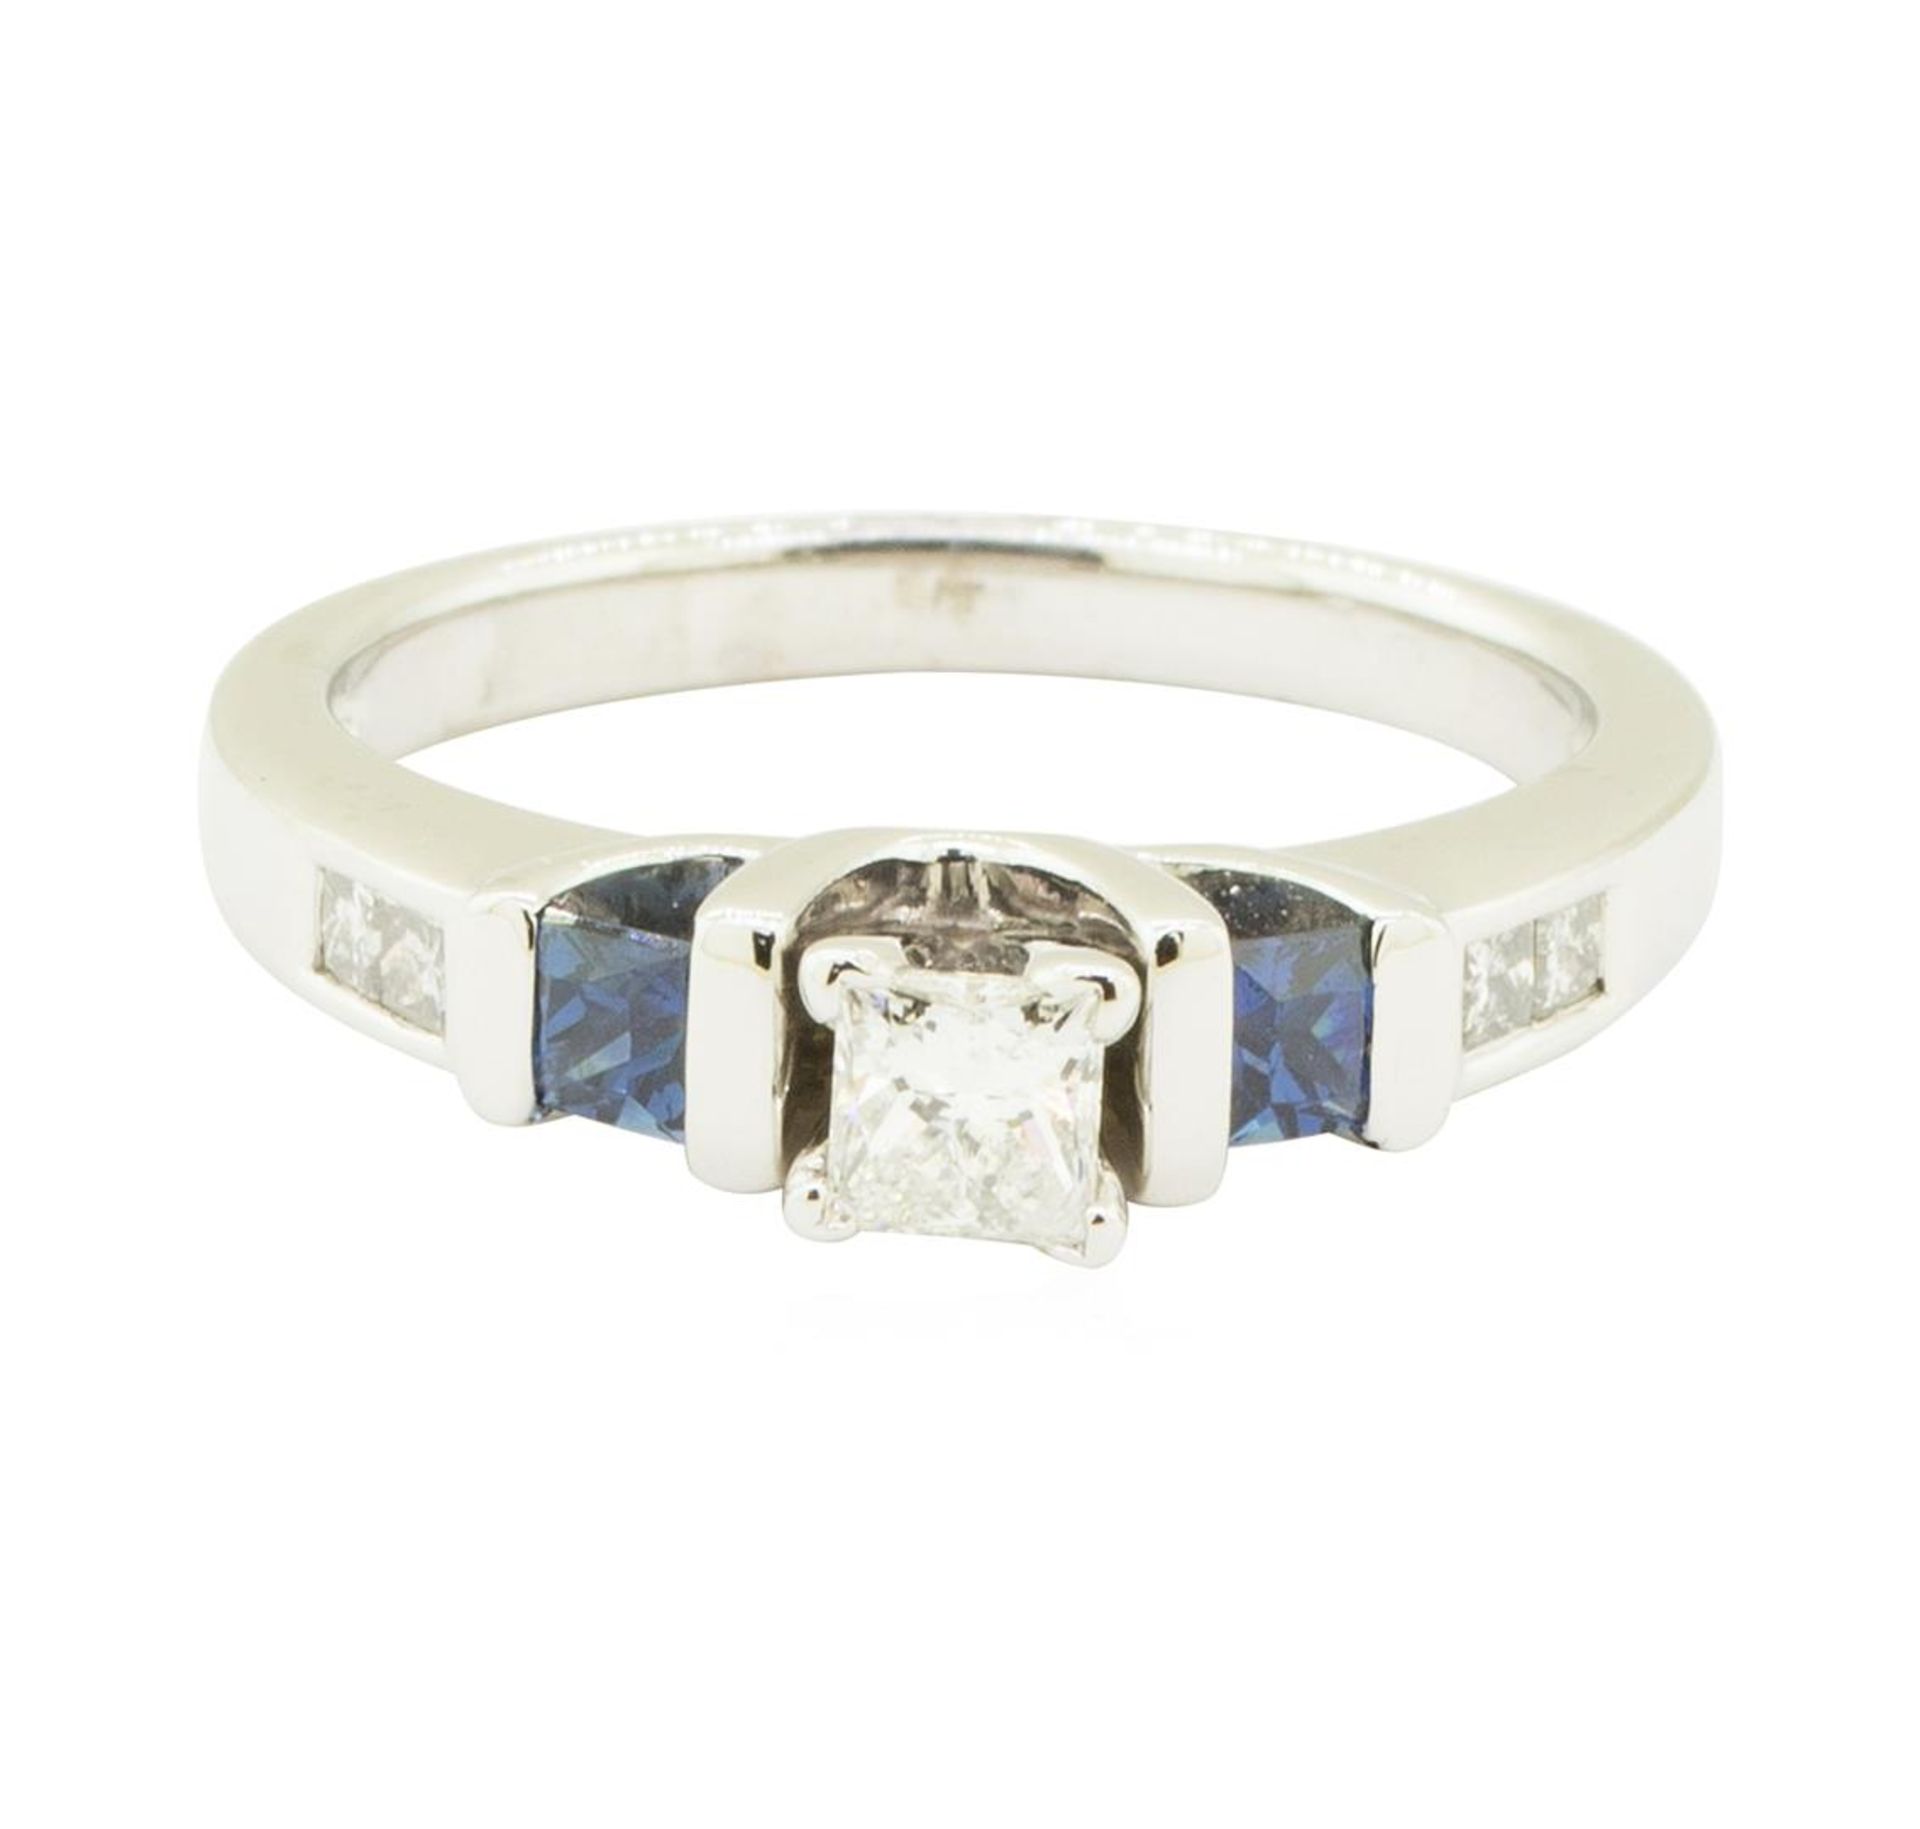 0.60 ctw Diamond and Sapphire Ring - 14KT White Gold - Image 2 of 4